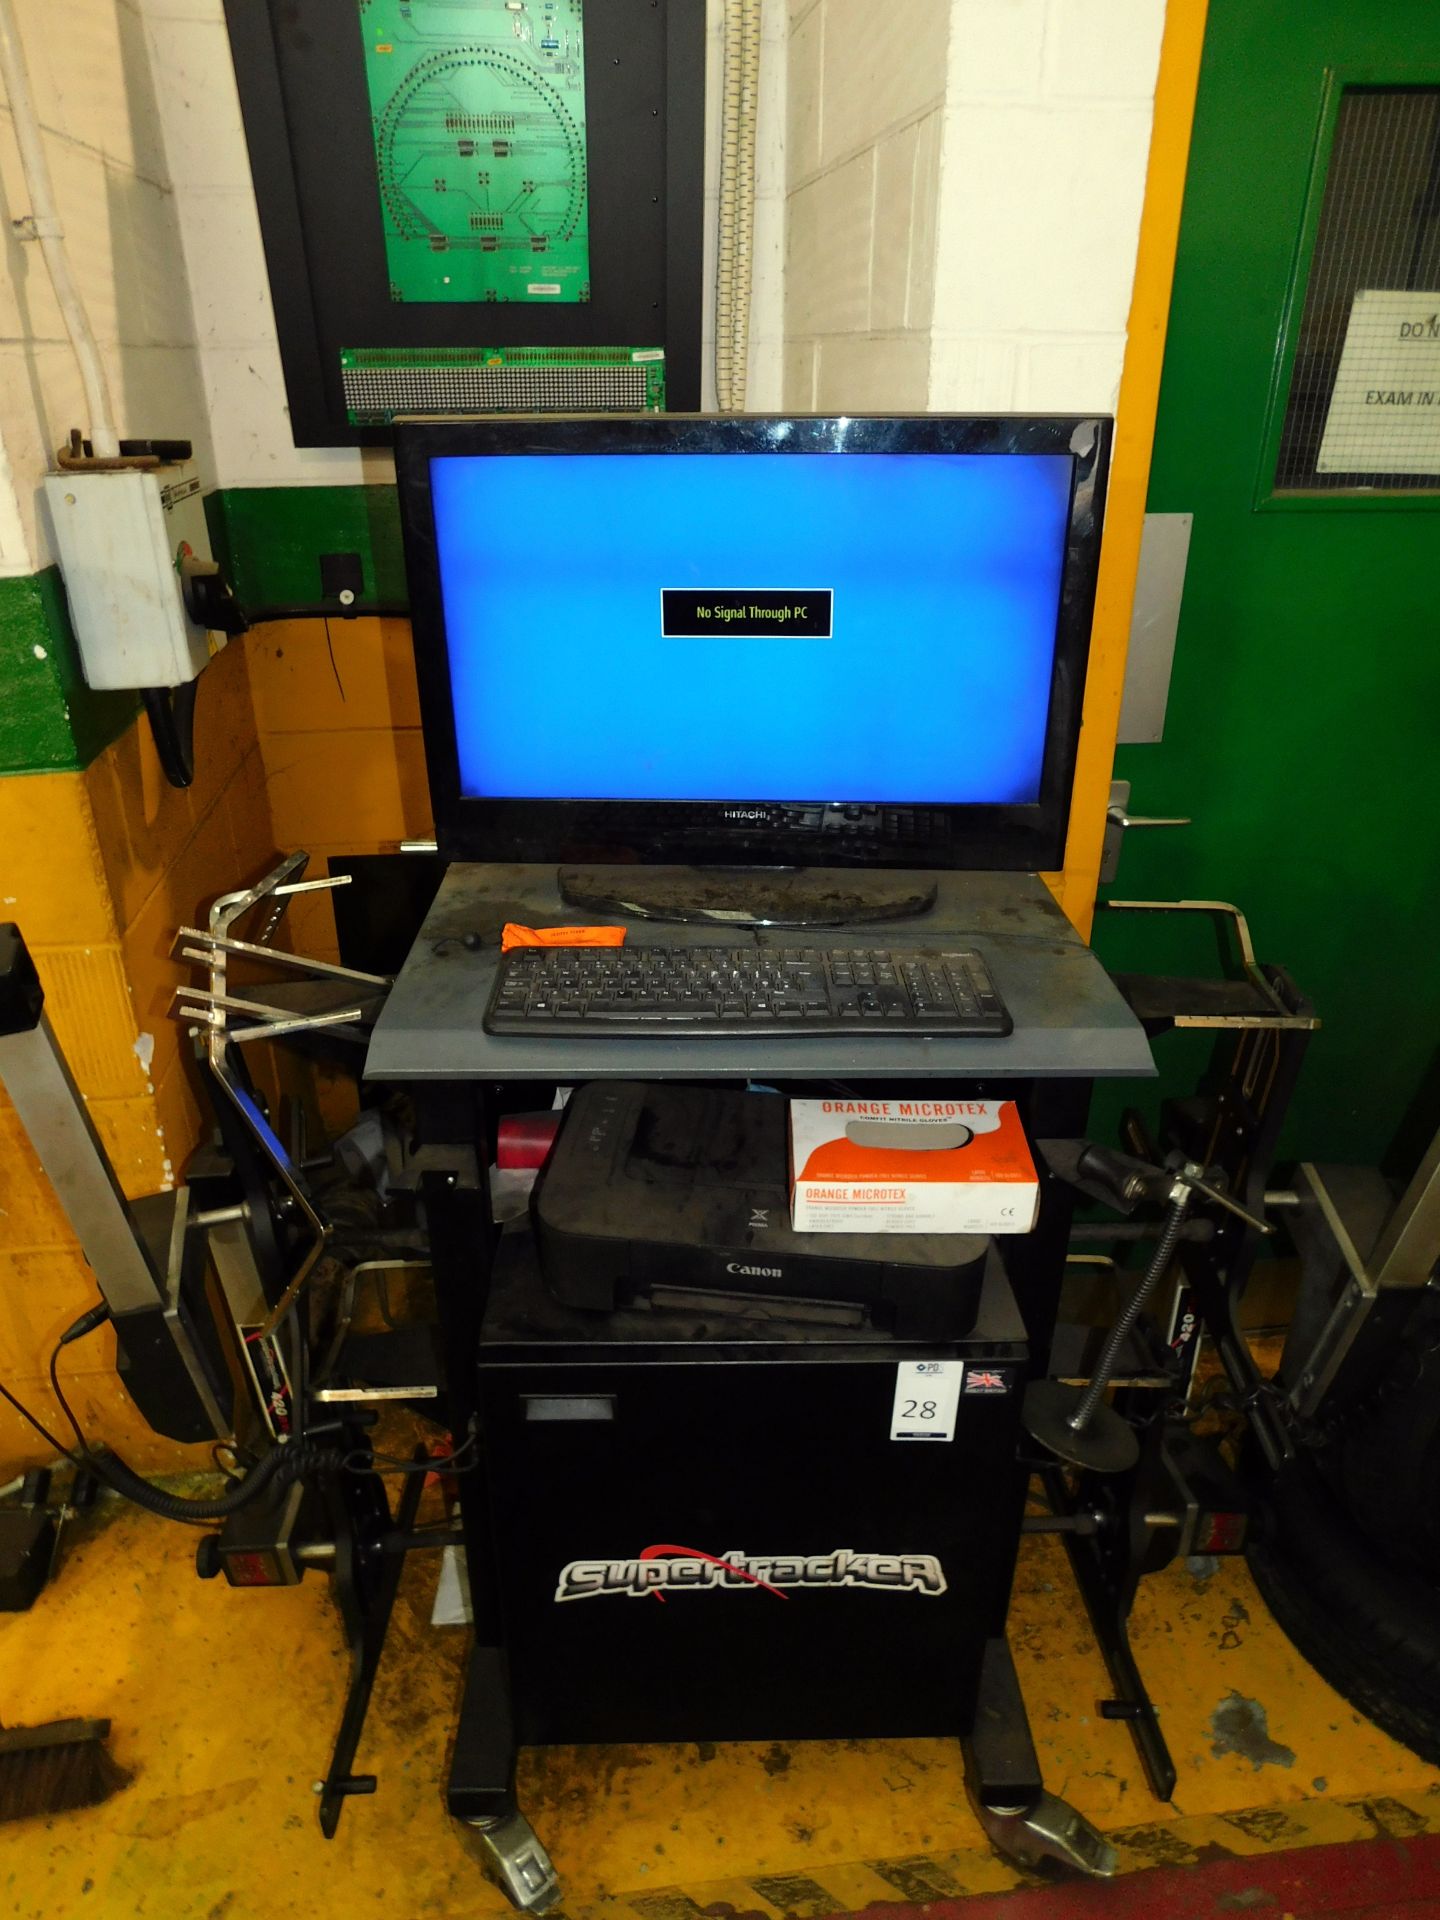 Supertracker Wheel Alignment System (Location Northampton. Please Refer to General Notes)